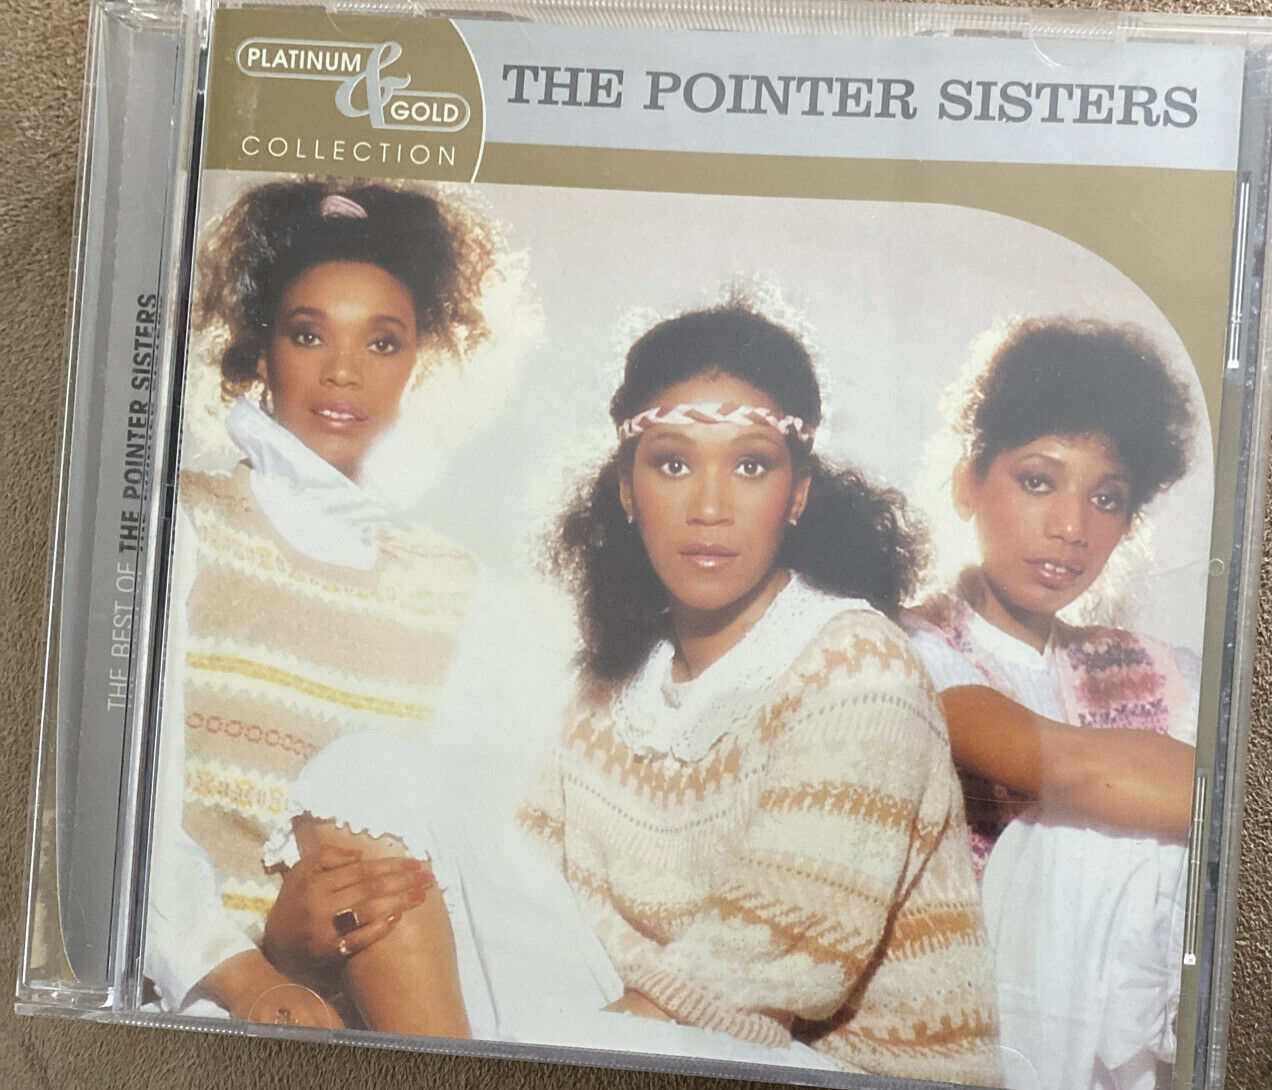 Primary image for THE POINTER SISTERS - PLATINUM & GOLD COLLECTION - GREAT CONDITION CD